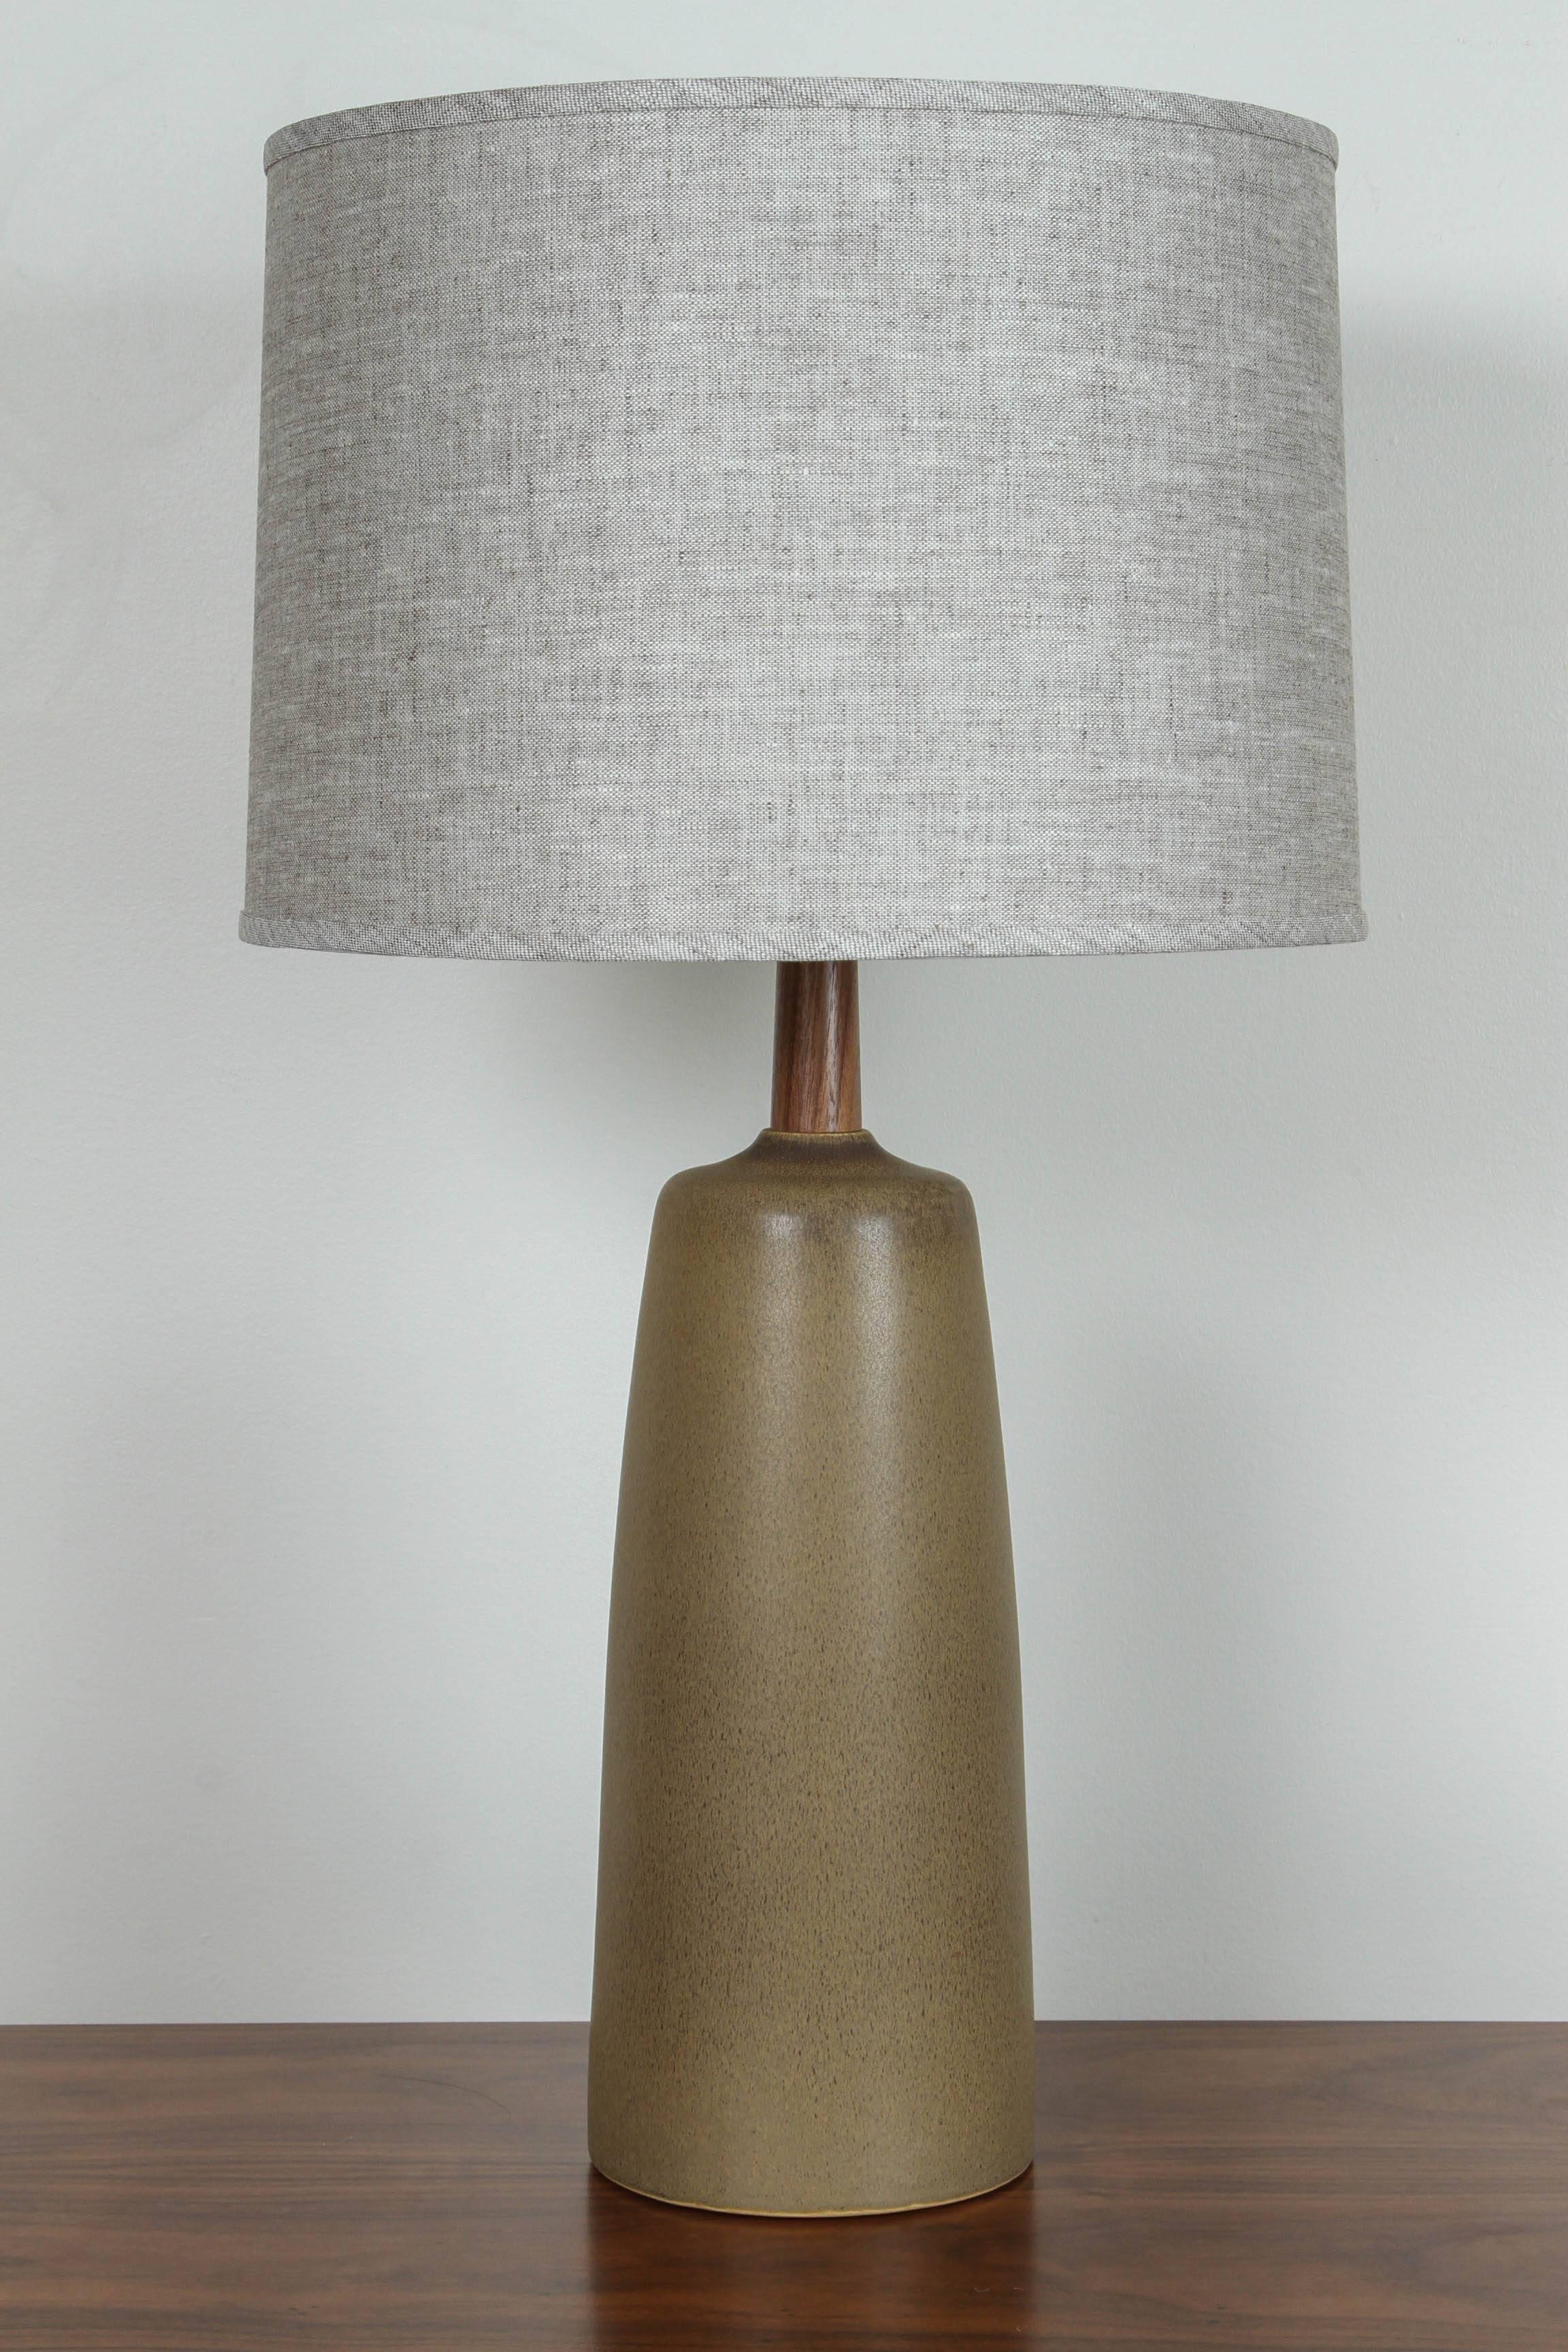 Ceramic Pair of Tor Lamps by Stone and Sawyer for Lawson-Fenning